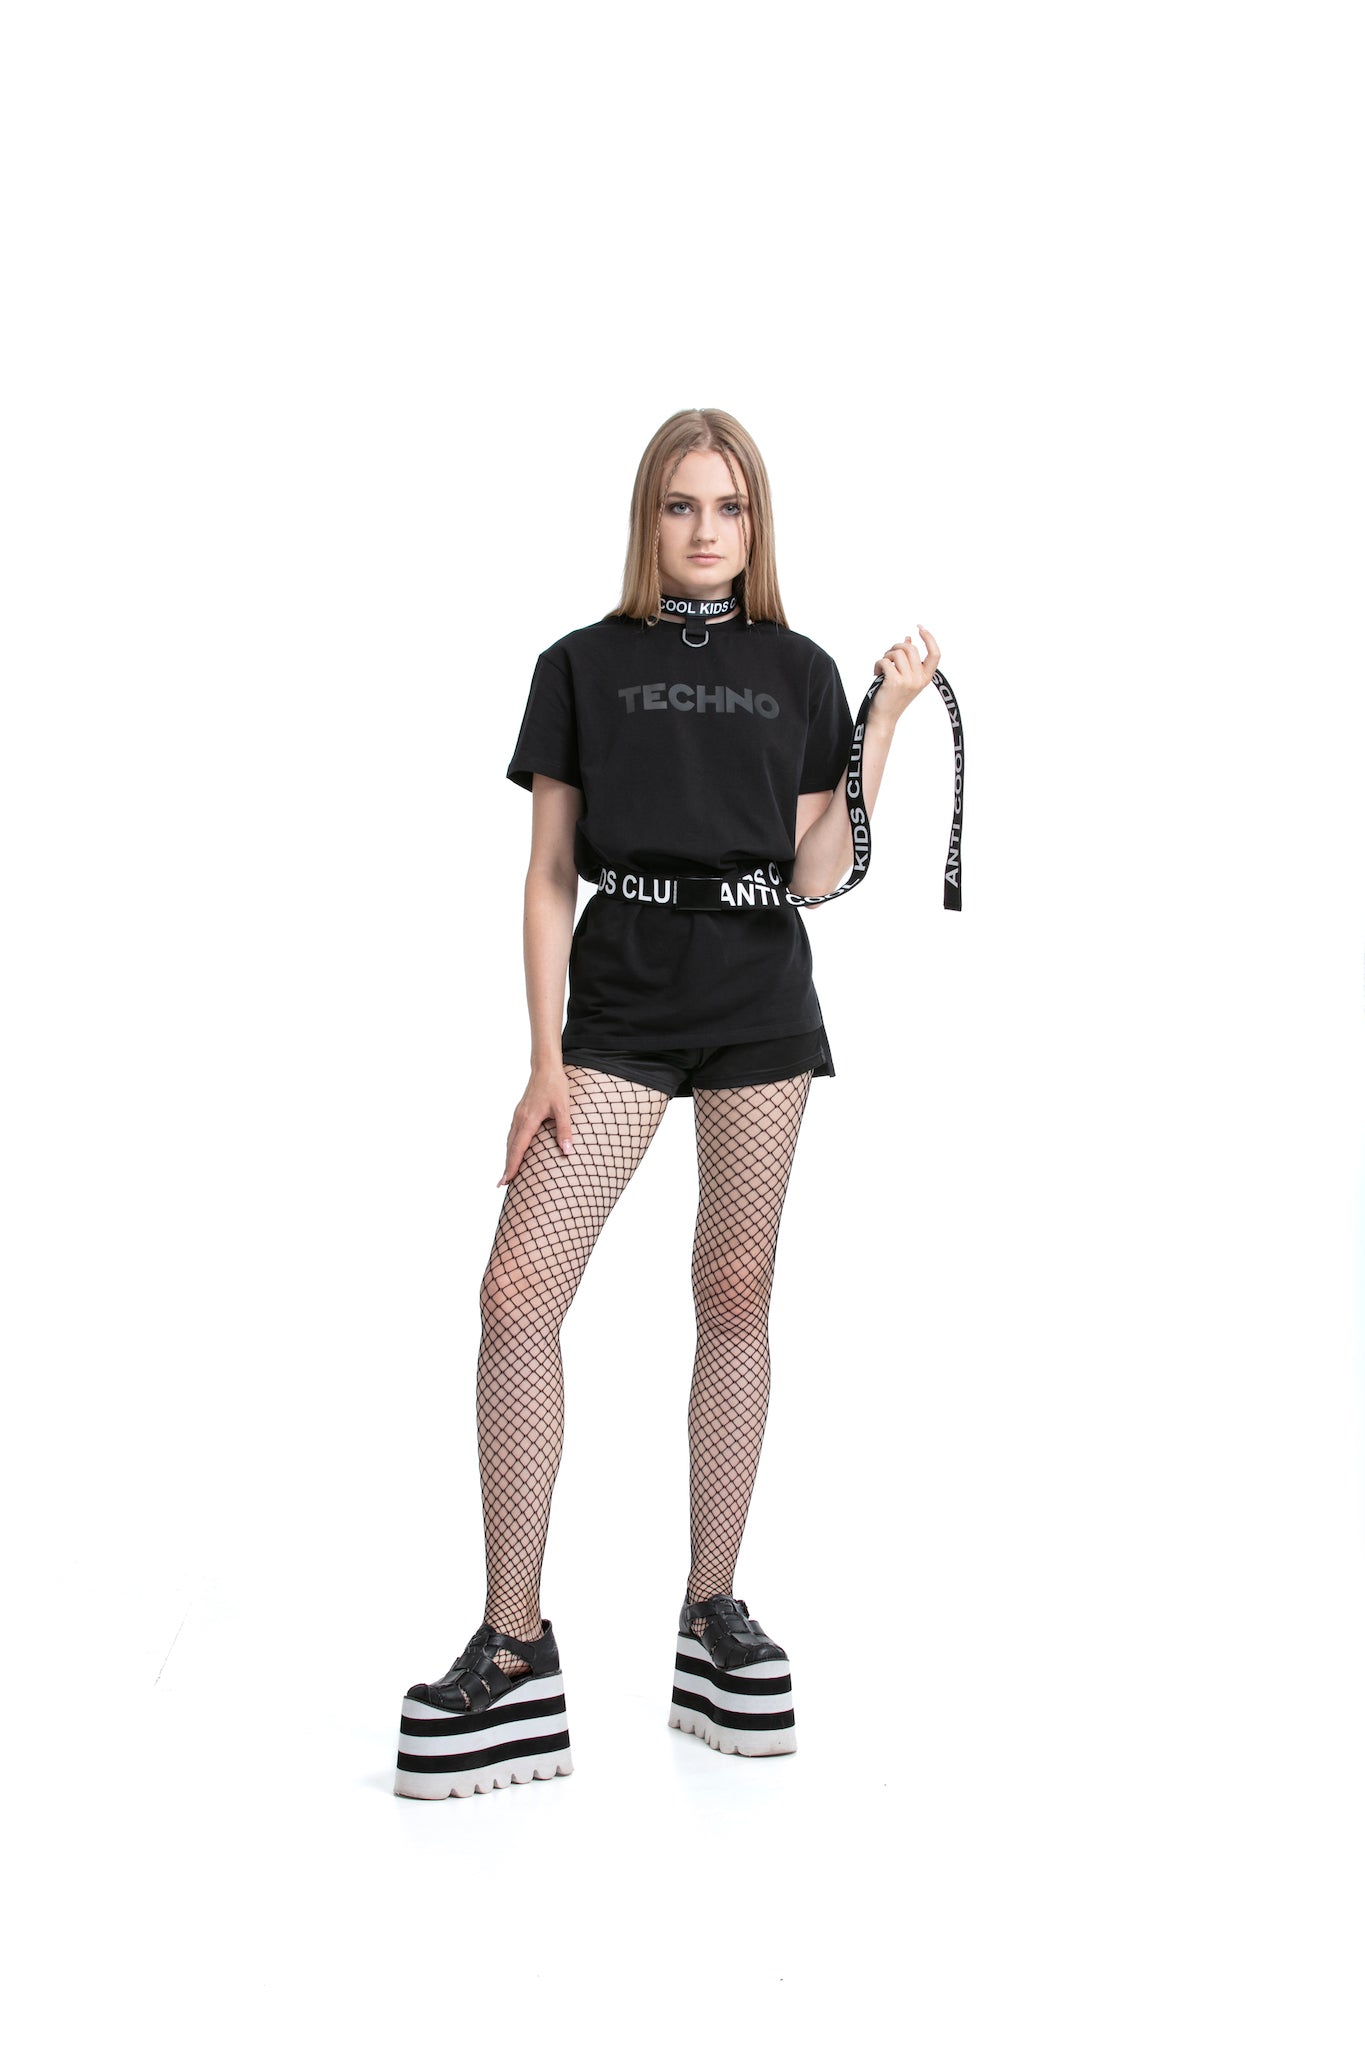 Matte Techno - regular fit T-shirt with side cuts